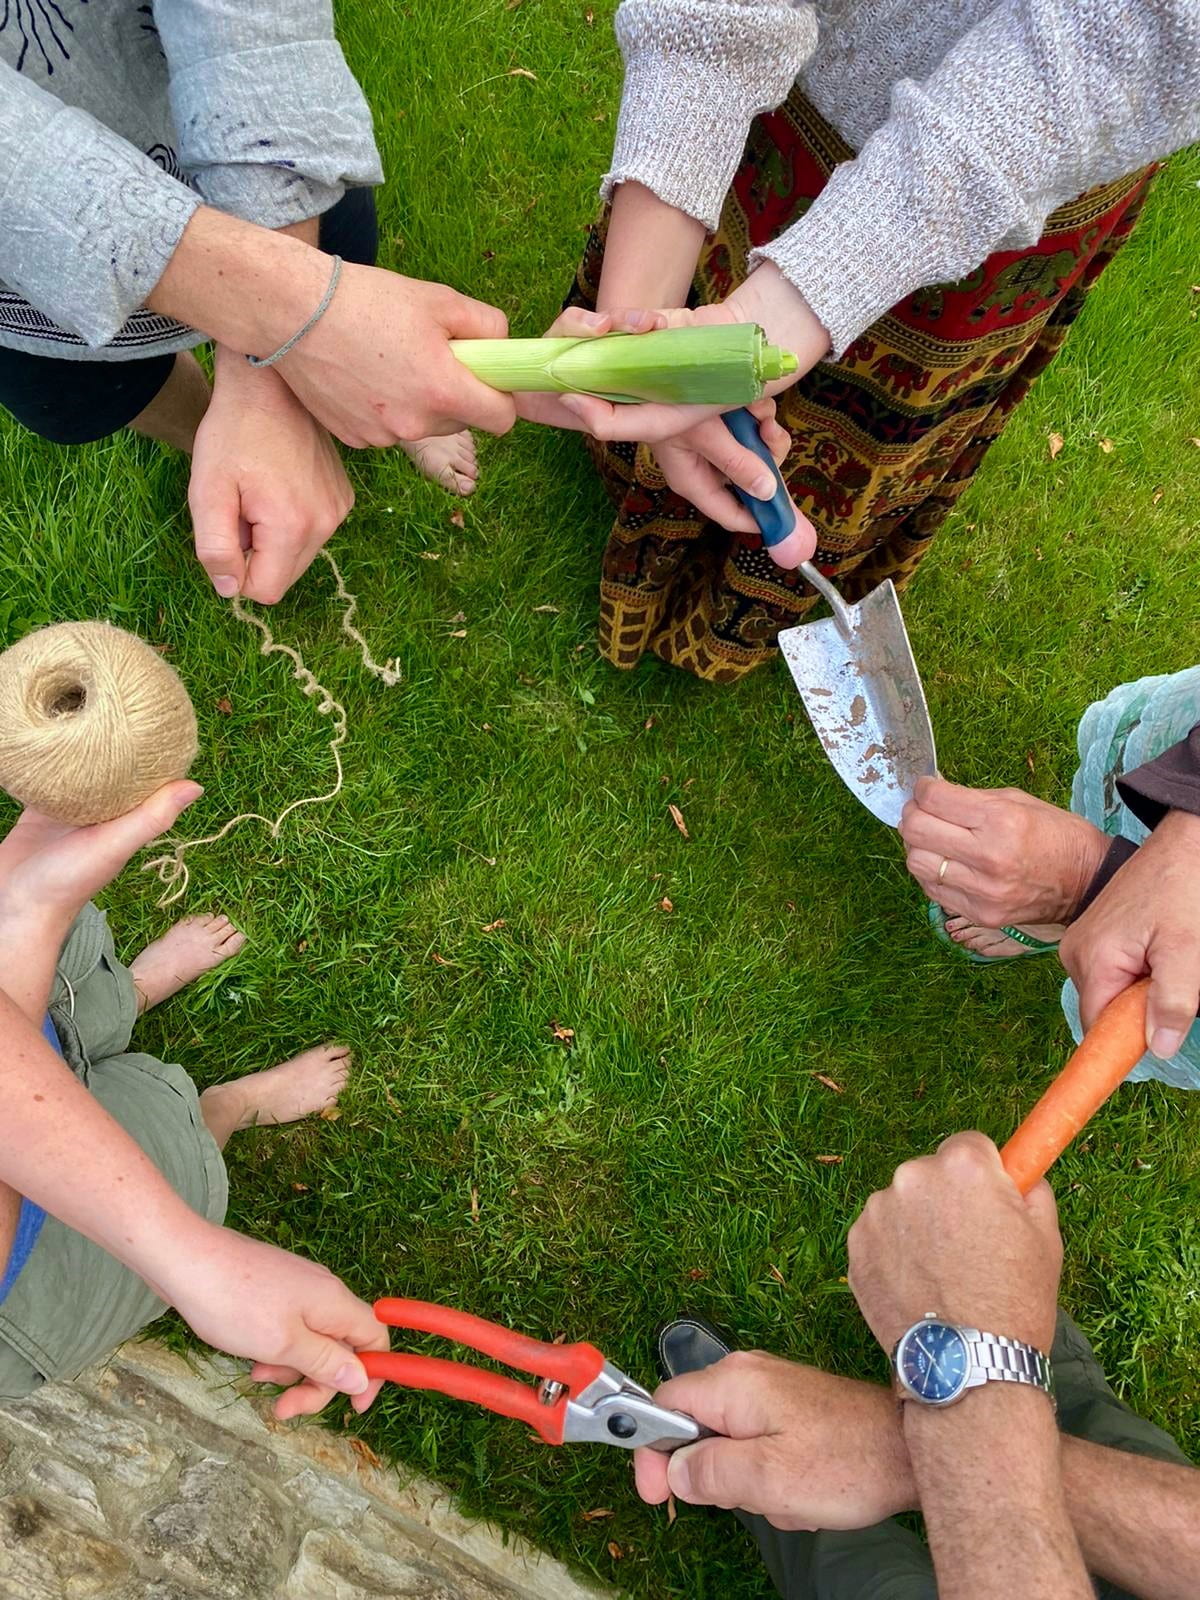 Four people standing in a circle, photographed from above. Their arms are crossed in an 'Auld Lang Syne' style. However, instead of holding each other's hands, they hold objects. The objects are (clockwise from top): a leek; a trowel; a carrot; pruning shears; yarn.